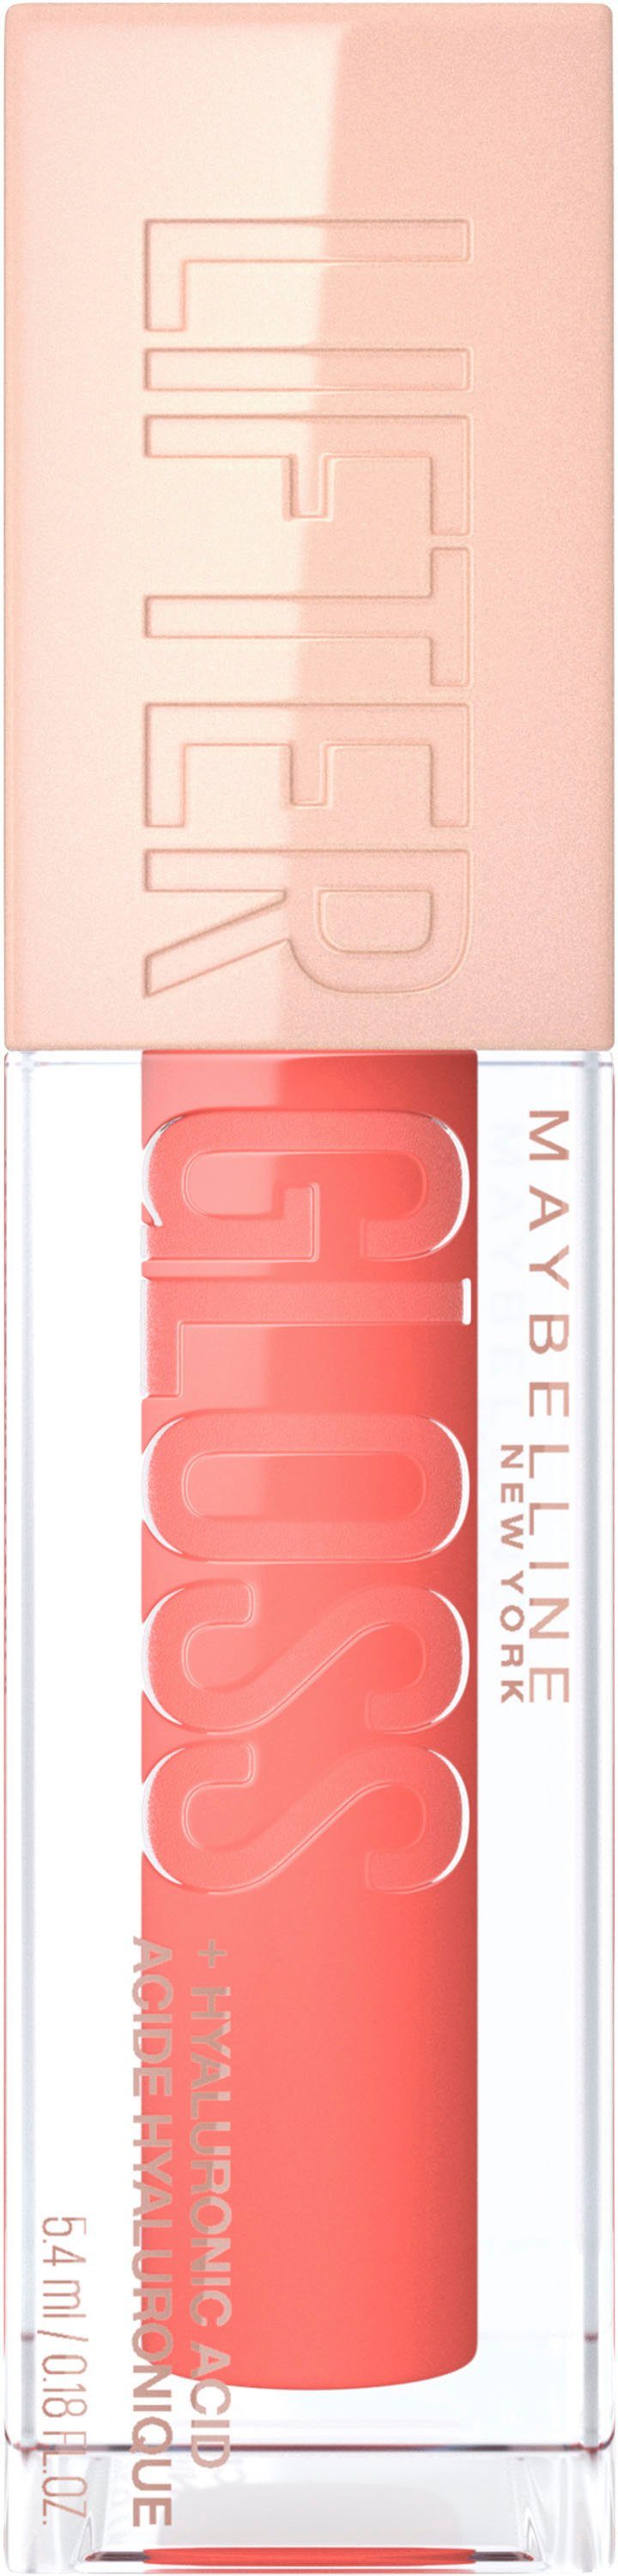 Lifter NEW Gloss YORK New MAYBELLINE Lipgloss York Maybelline